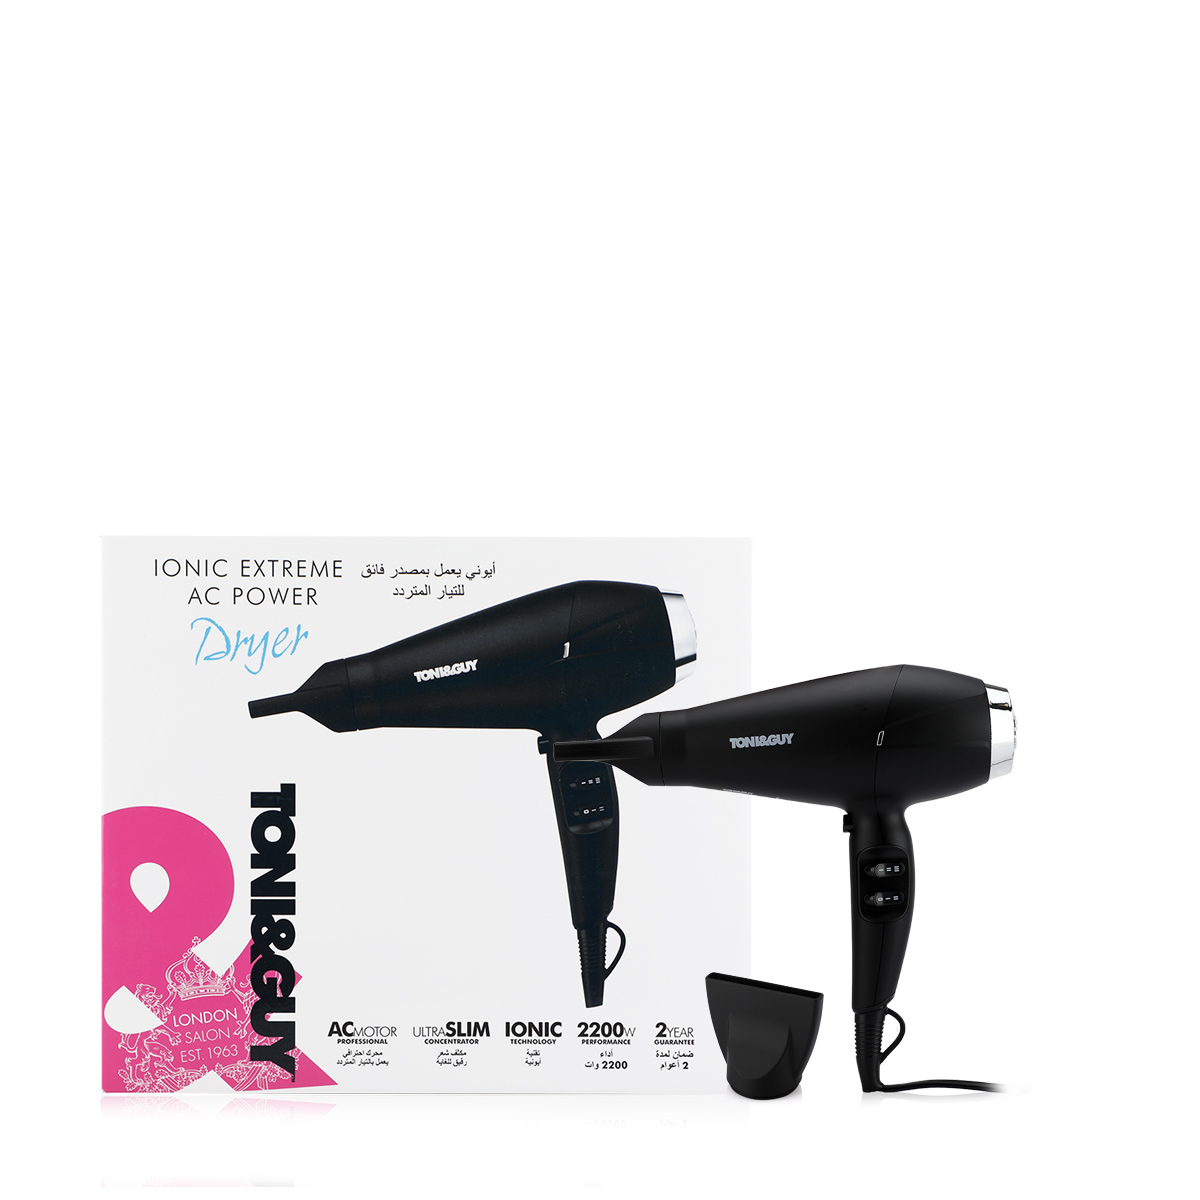 Buy Ionic Extreme AC Power Hair Dryer 2200W - Black Online in Bahrain |  Boutiqaat